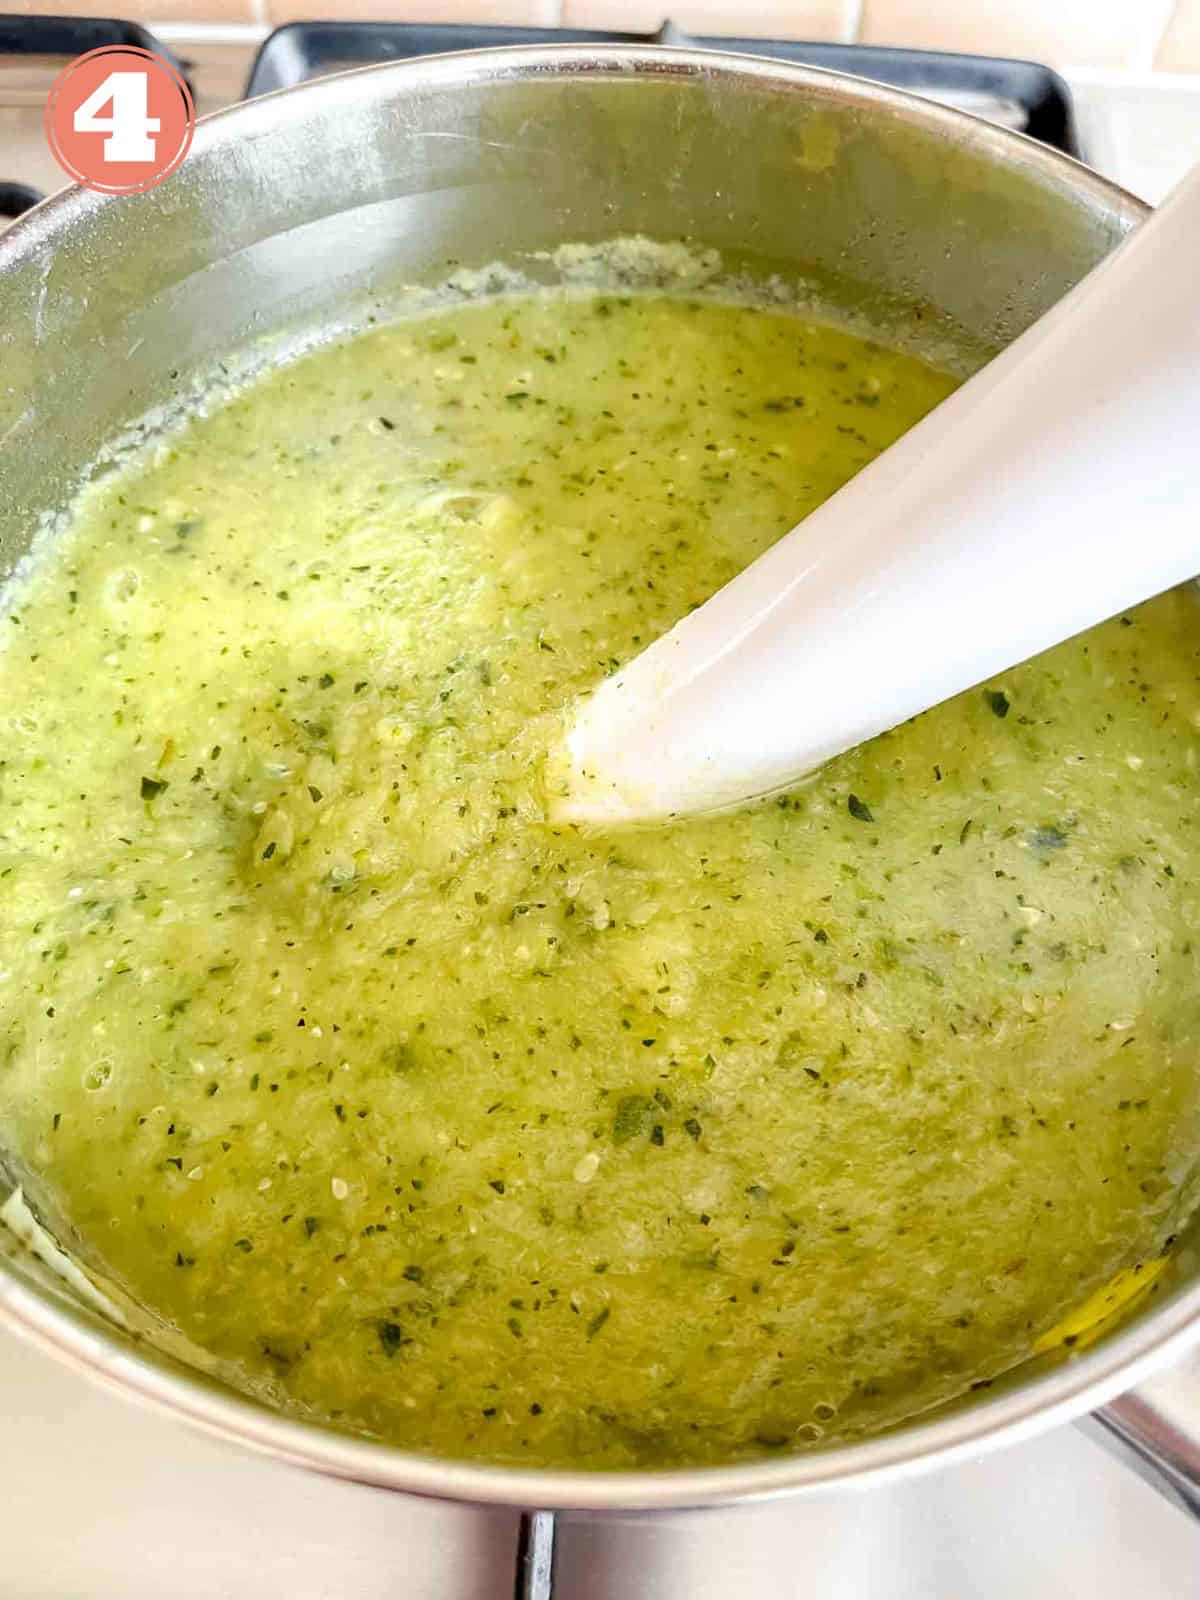 zucchini leek soup being blended with an immersion blender in a soup pot labelled number four.